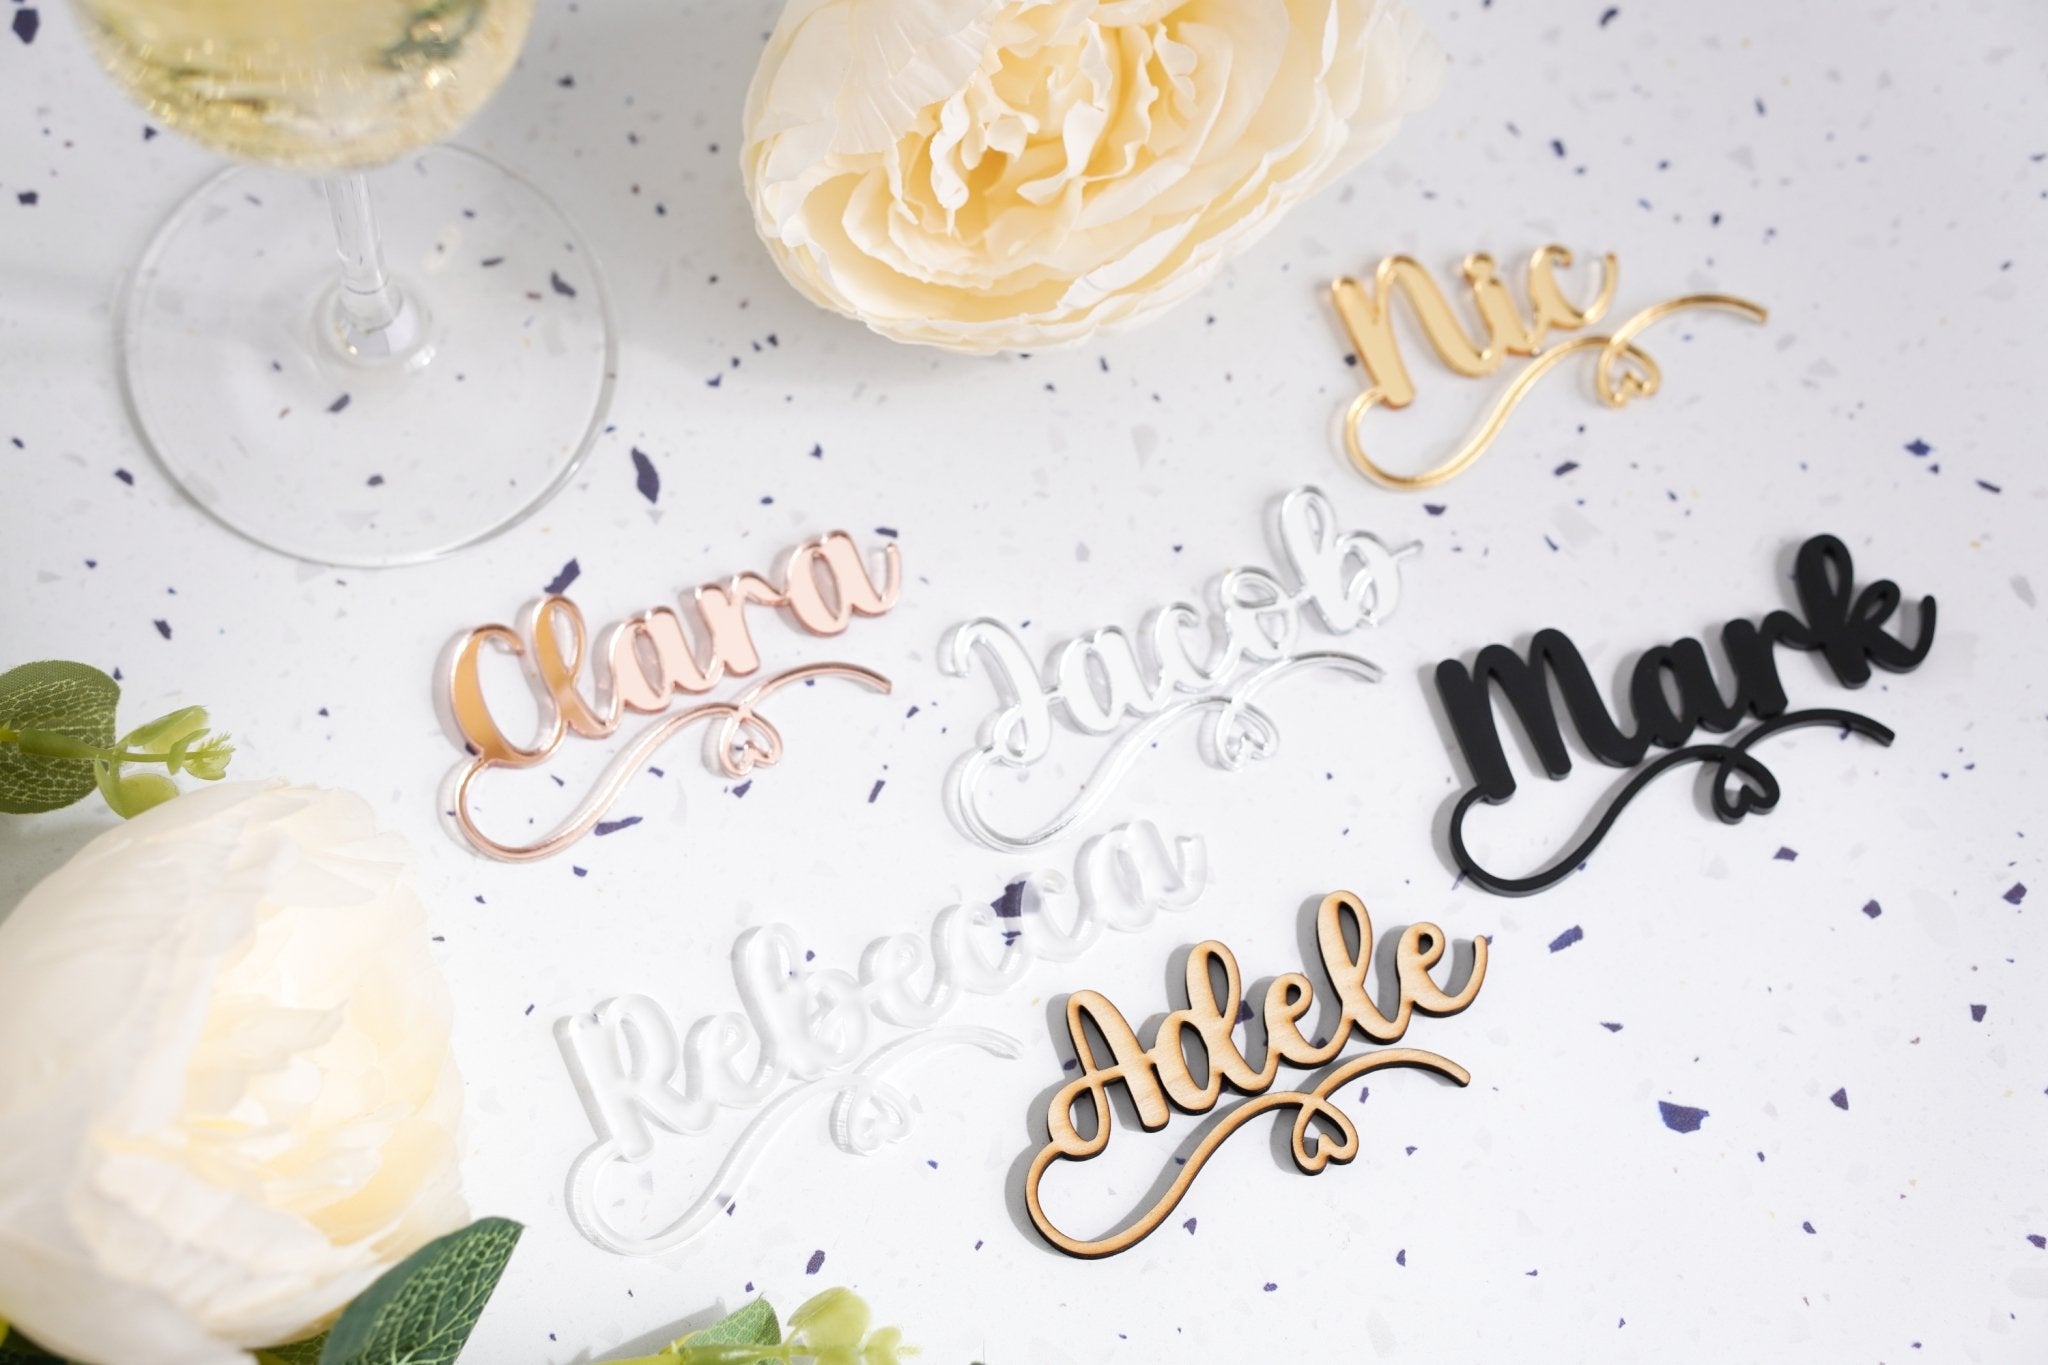 acrylic hook name tags for wine glasses